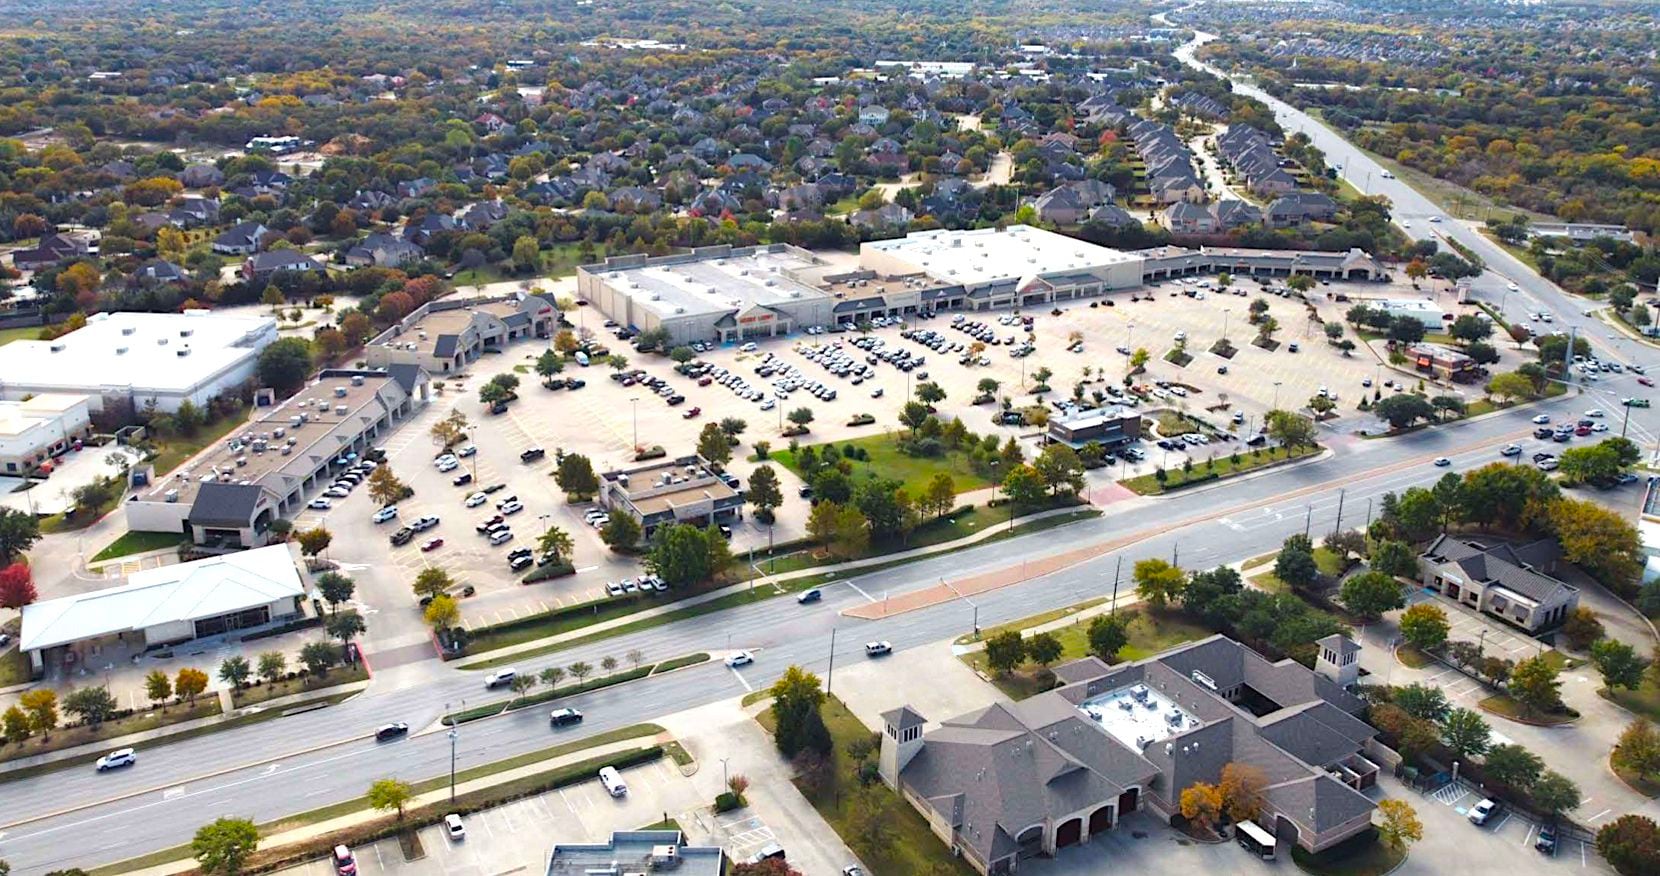 Southlake Marketplace is on Southlake Boulevard south of State Highway 114.